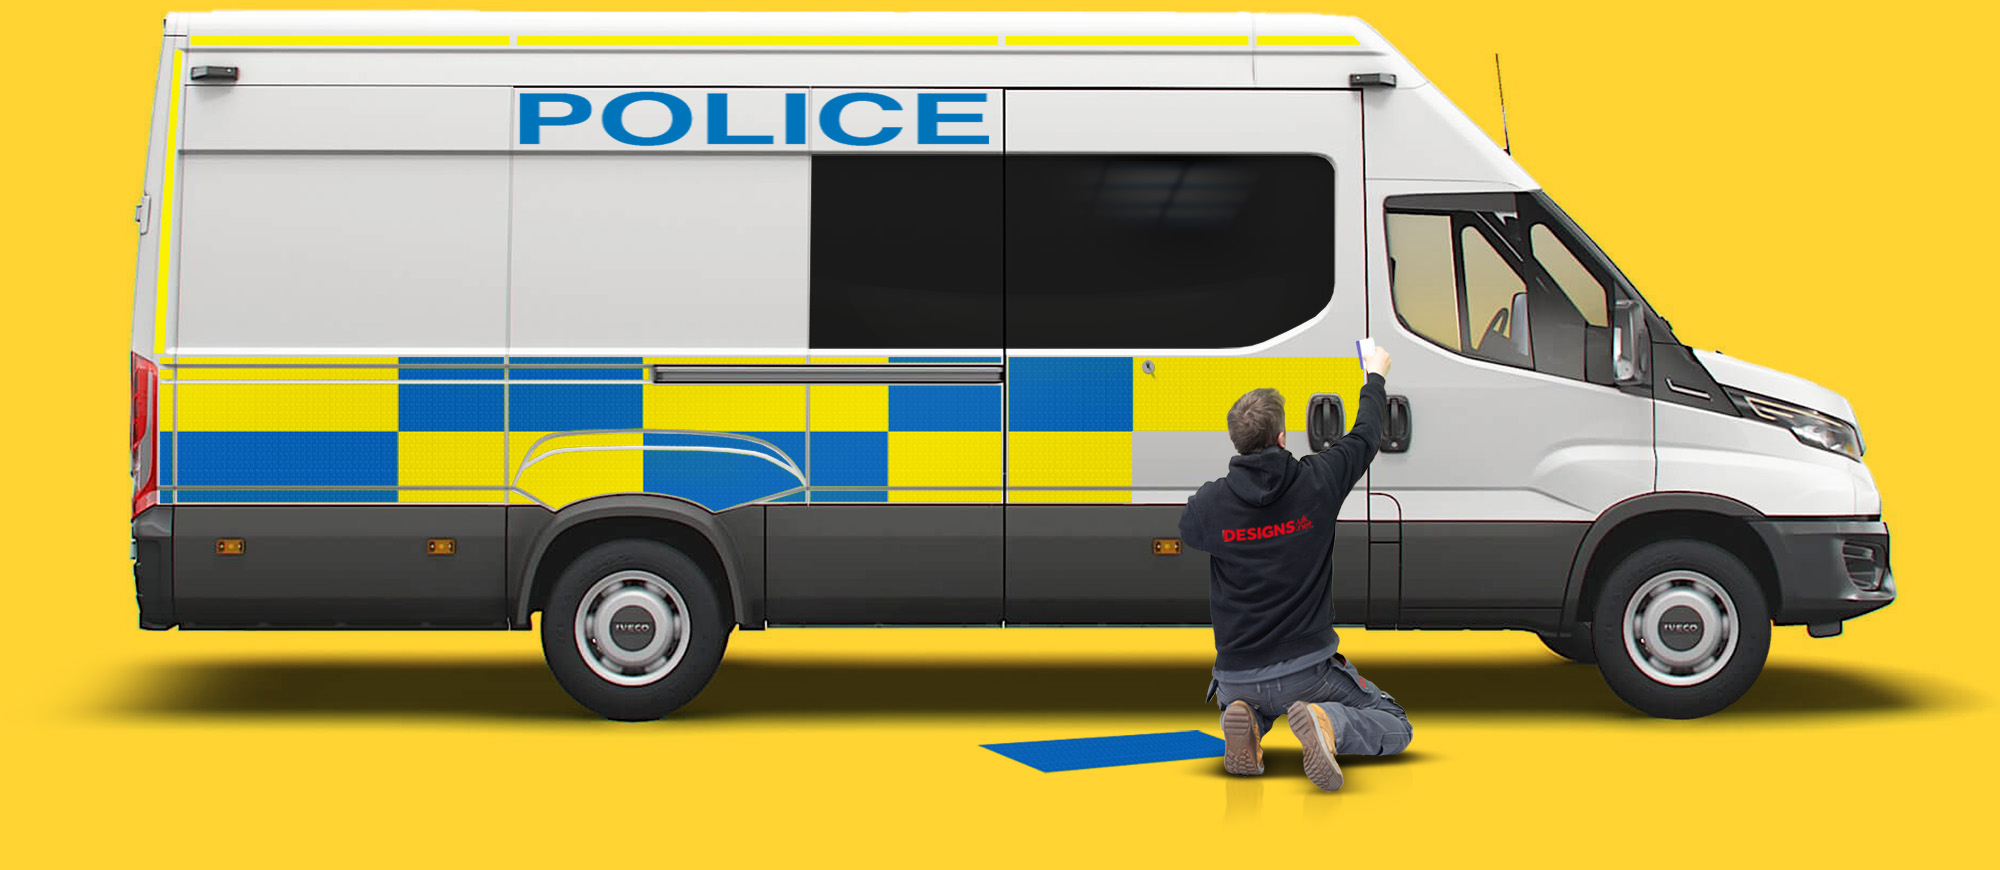 Designs employee fitting graphic to police van.